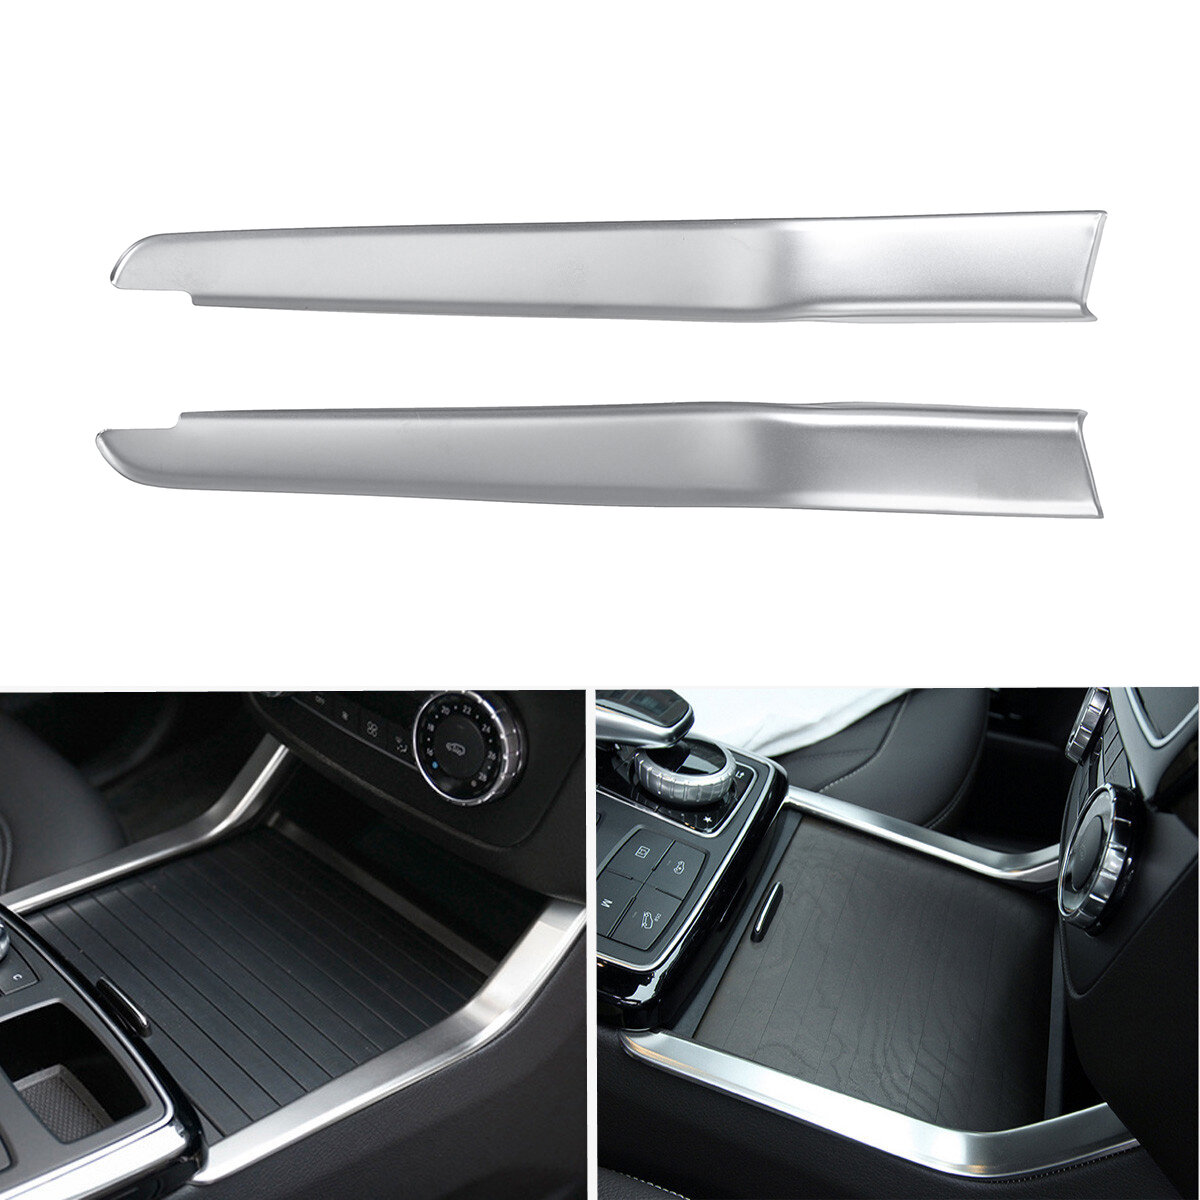 2PCS Console Water Cup Holder Cover Trim For Mercedes GL X166 ML W166 2012-2015